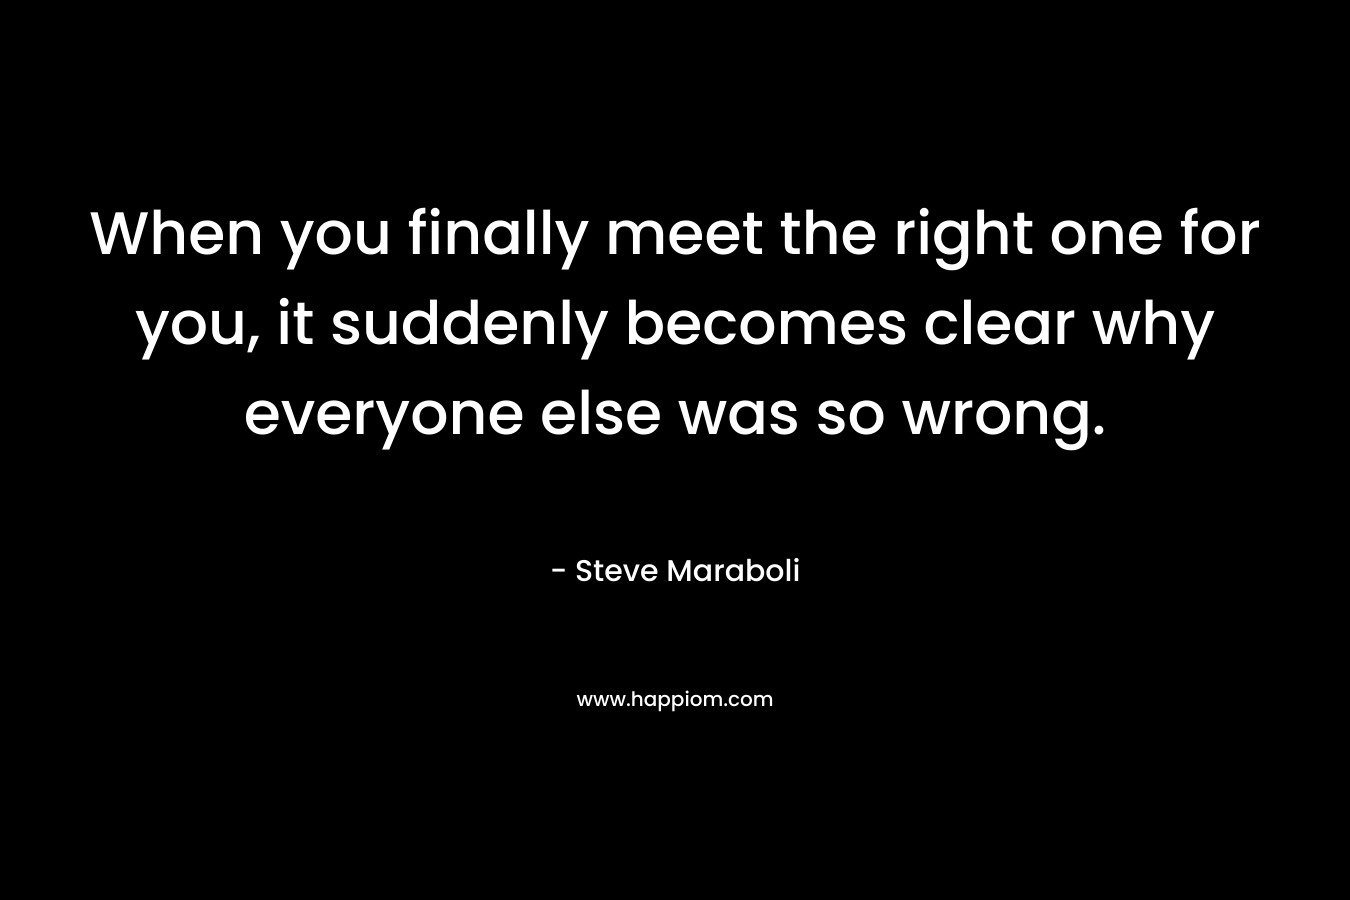 When you finally meet the right one for you, it suddenly becomes clear why everyone else was so wrong.